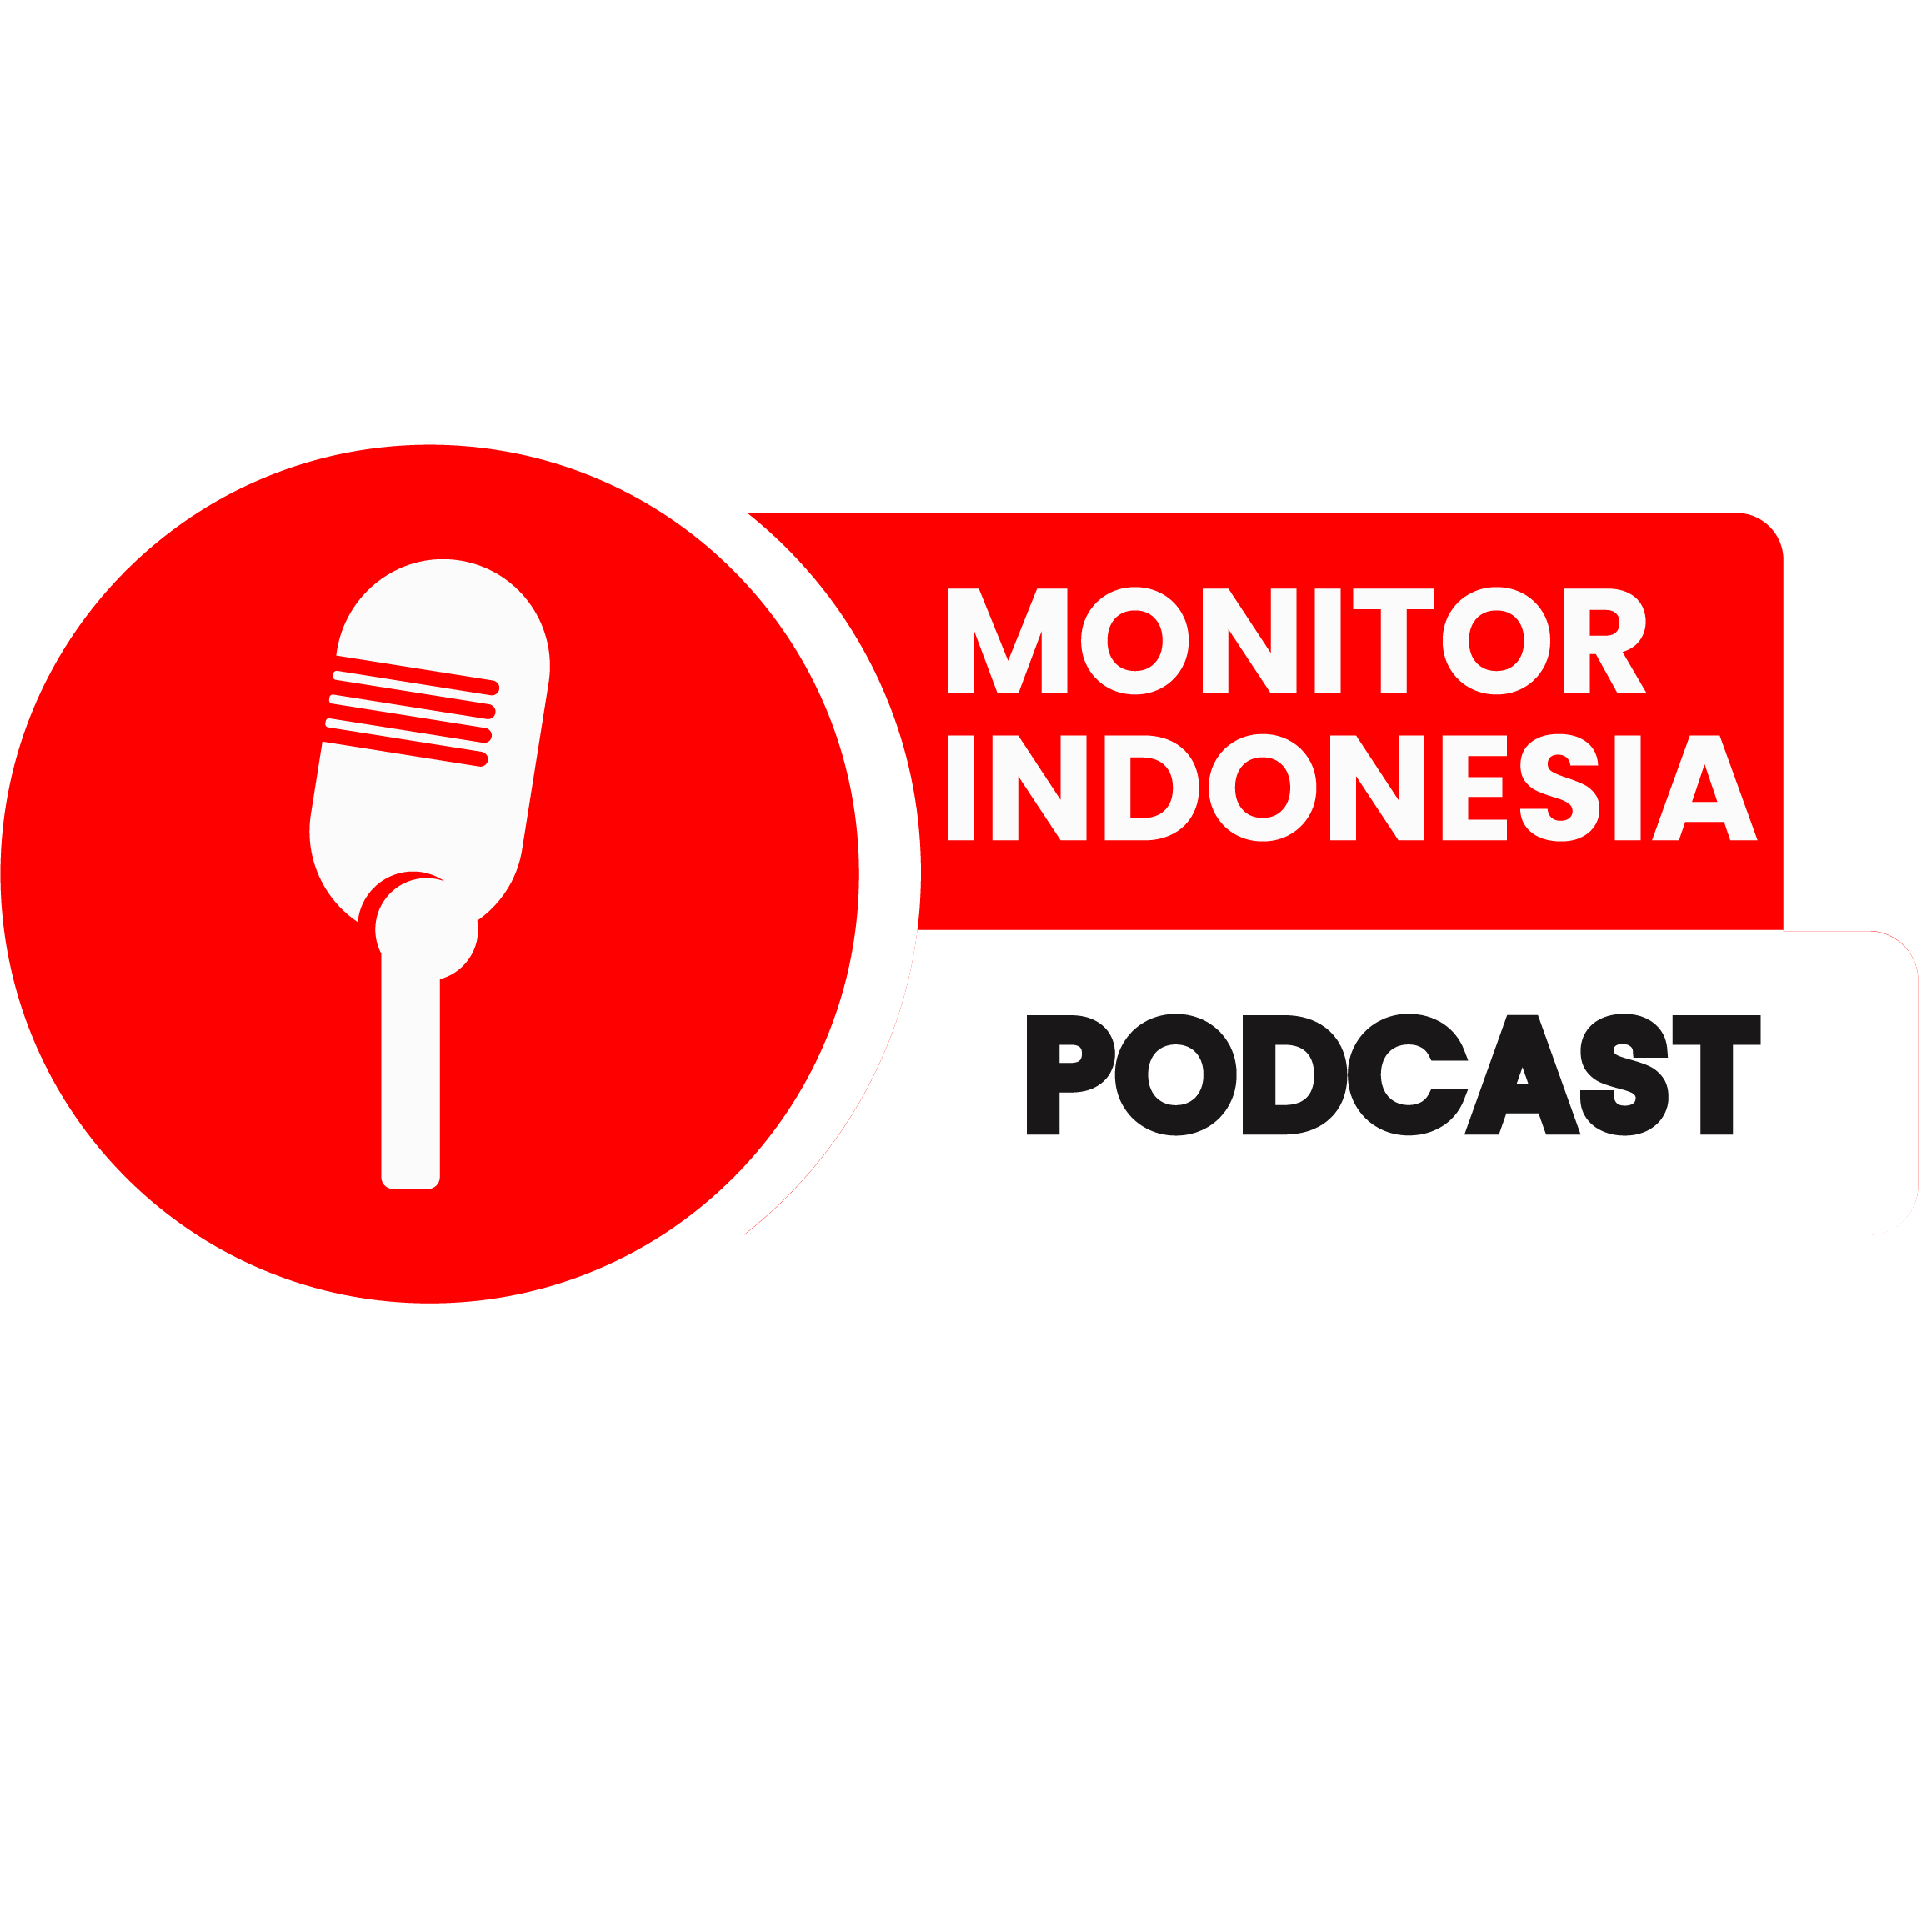 Monitor Indonesia Podcast